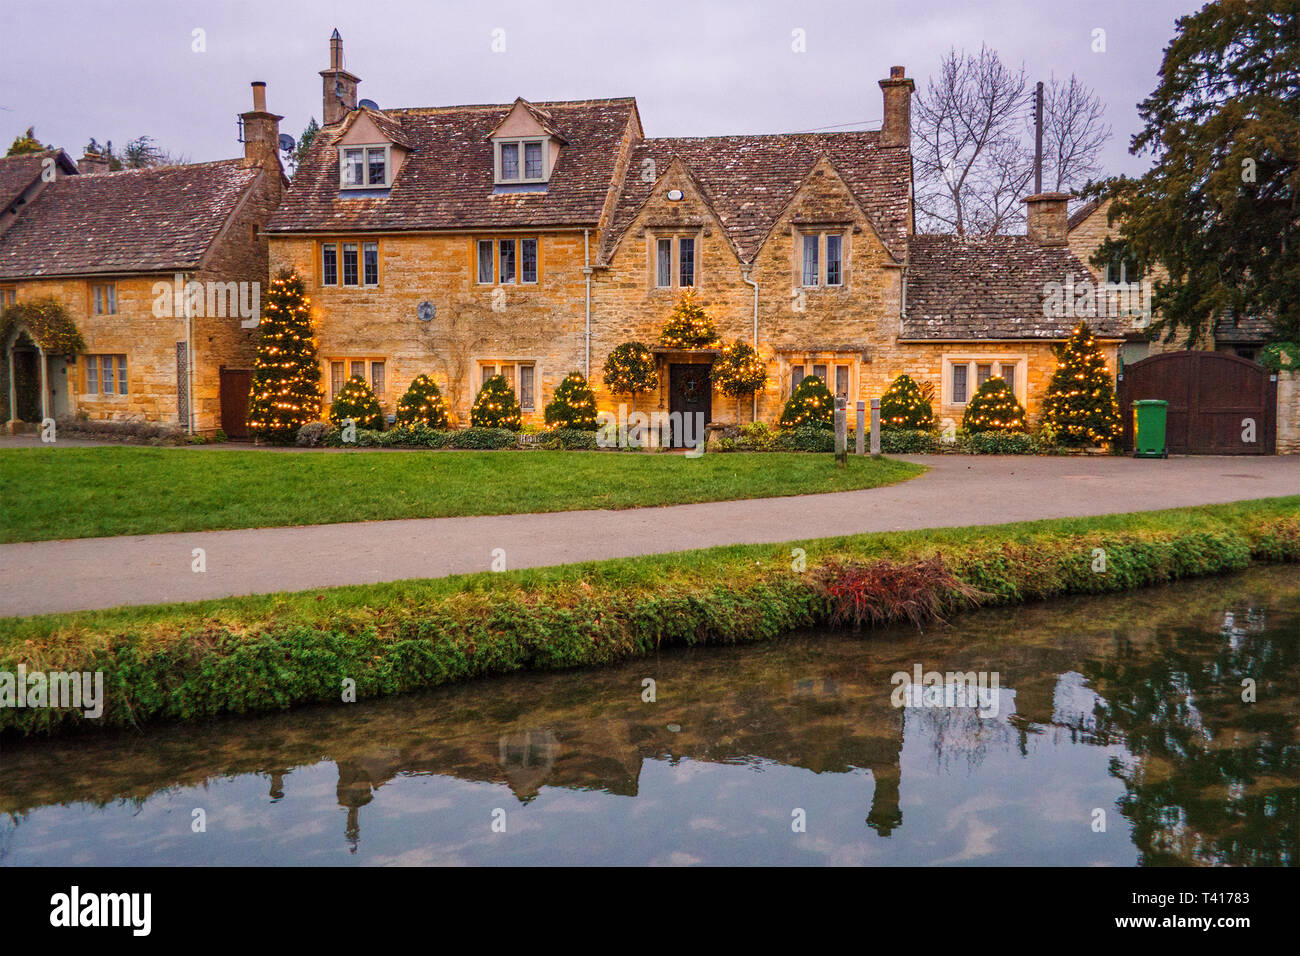 Lower Slaughter village, Cotswolds, Gloucestershire, Regno Unito Foto Stock